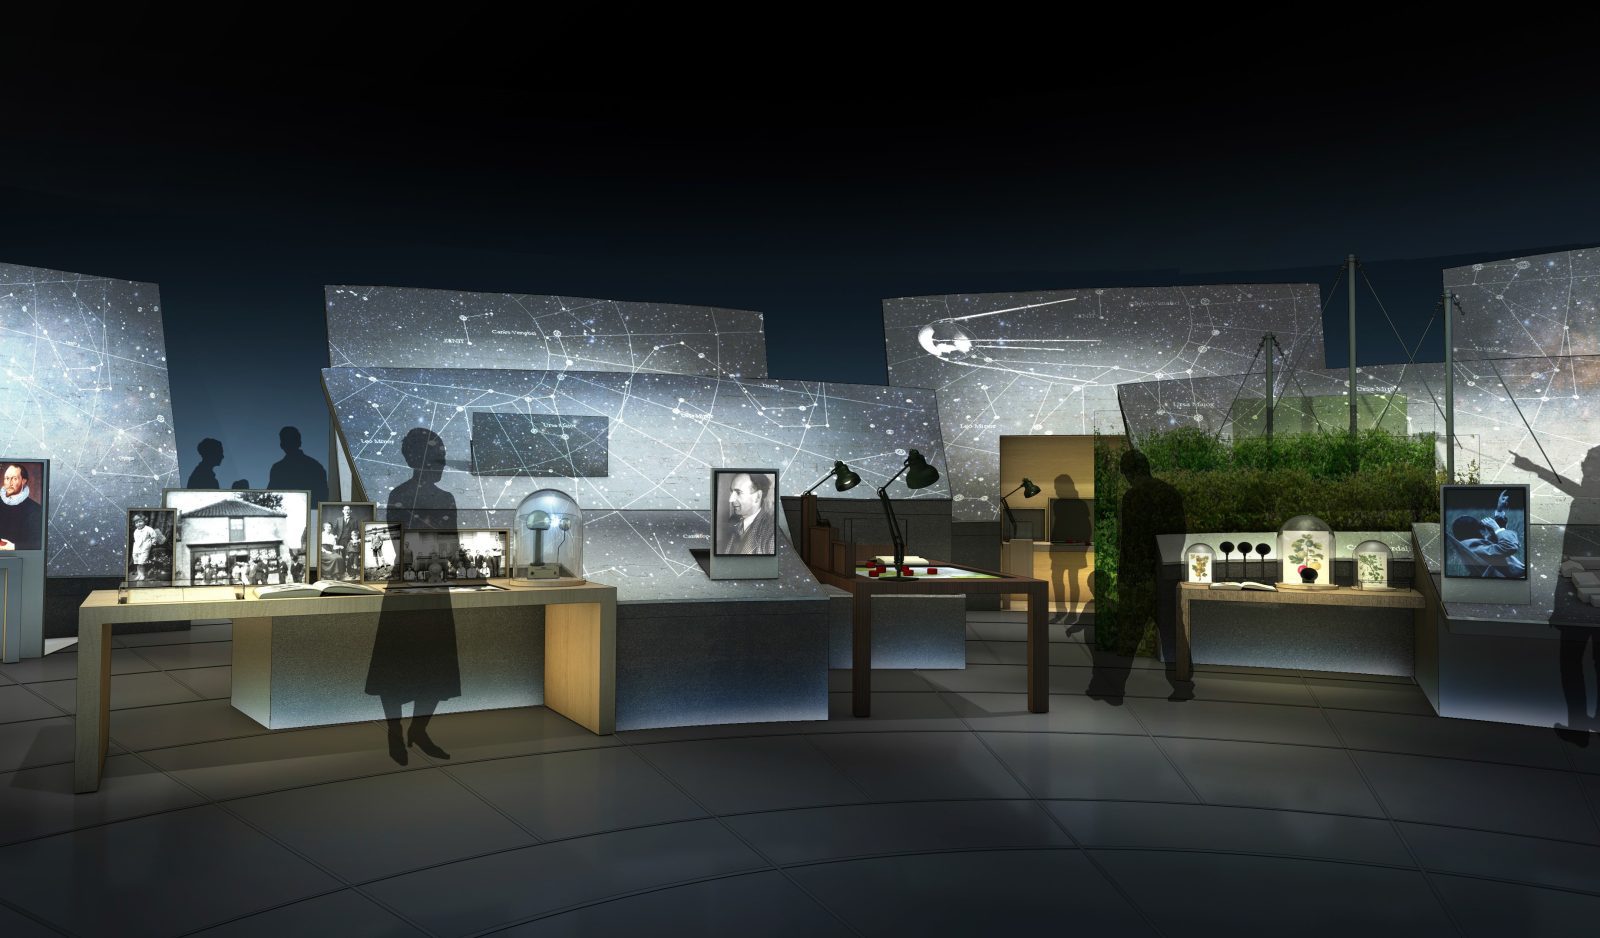 A new £21.5m interactive visitor attraction is opening at Jodrell Bank this summer, The Manc